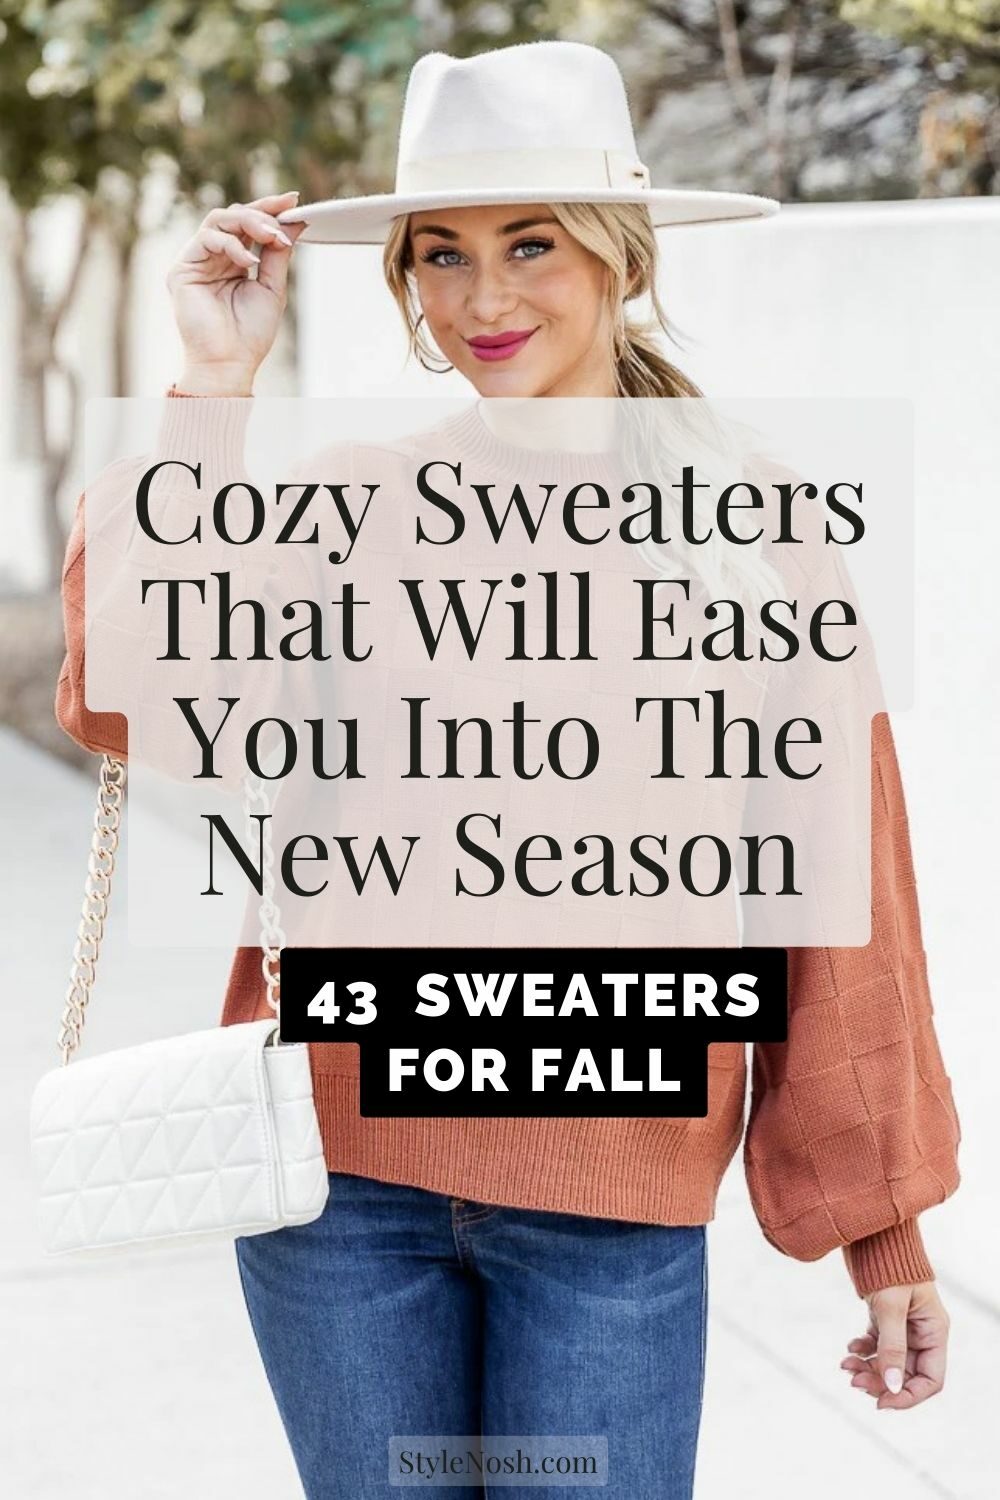 Cozy Sweaters For Fall That Will Ease You Into The New Season